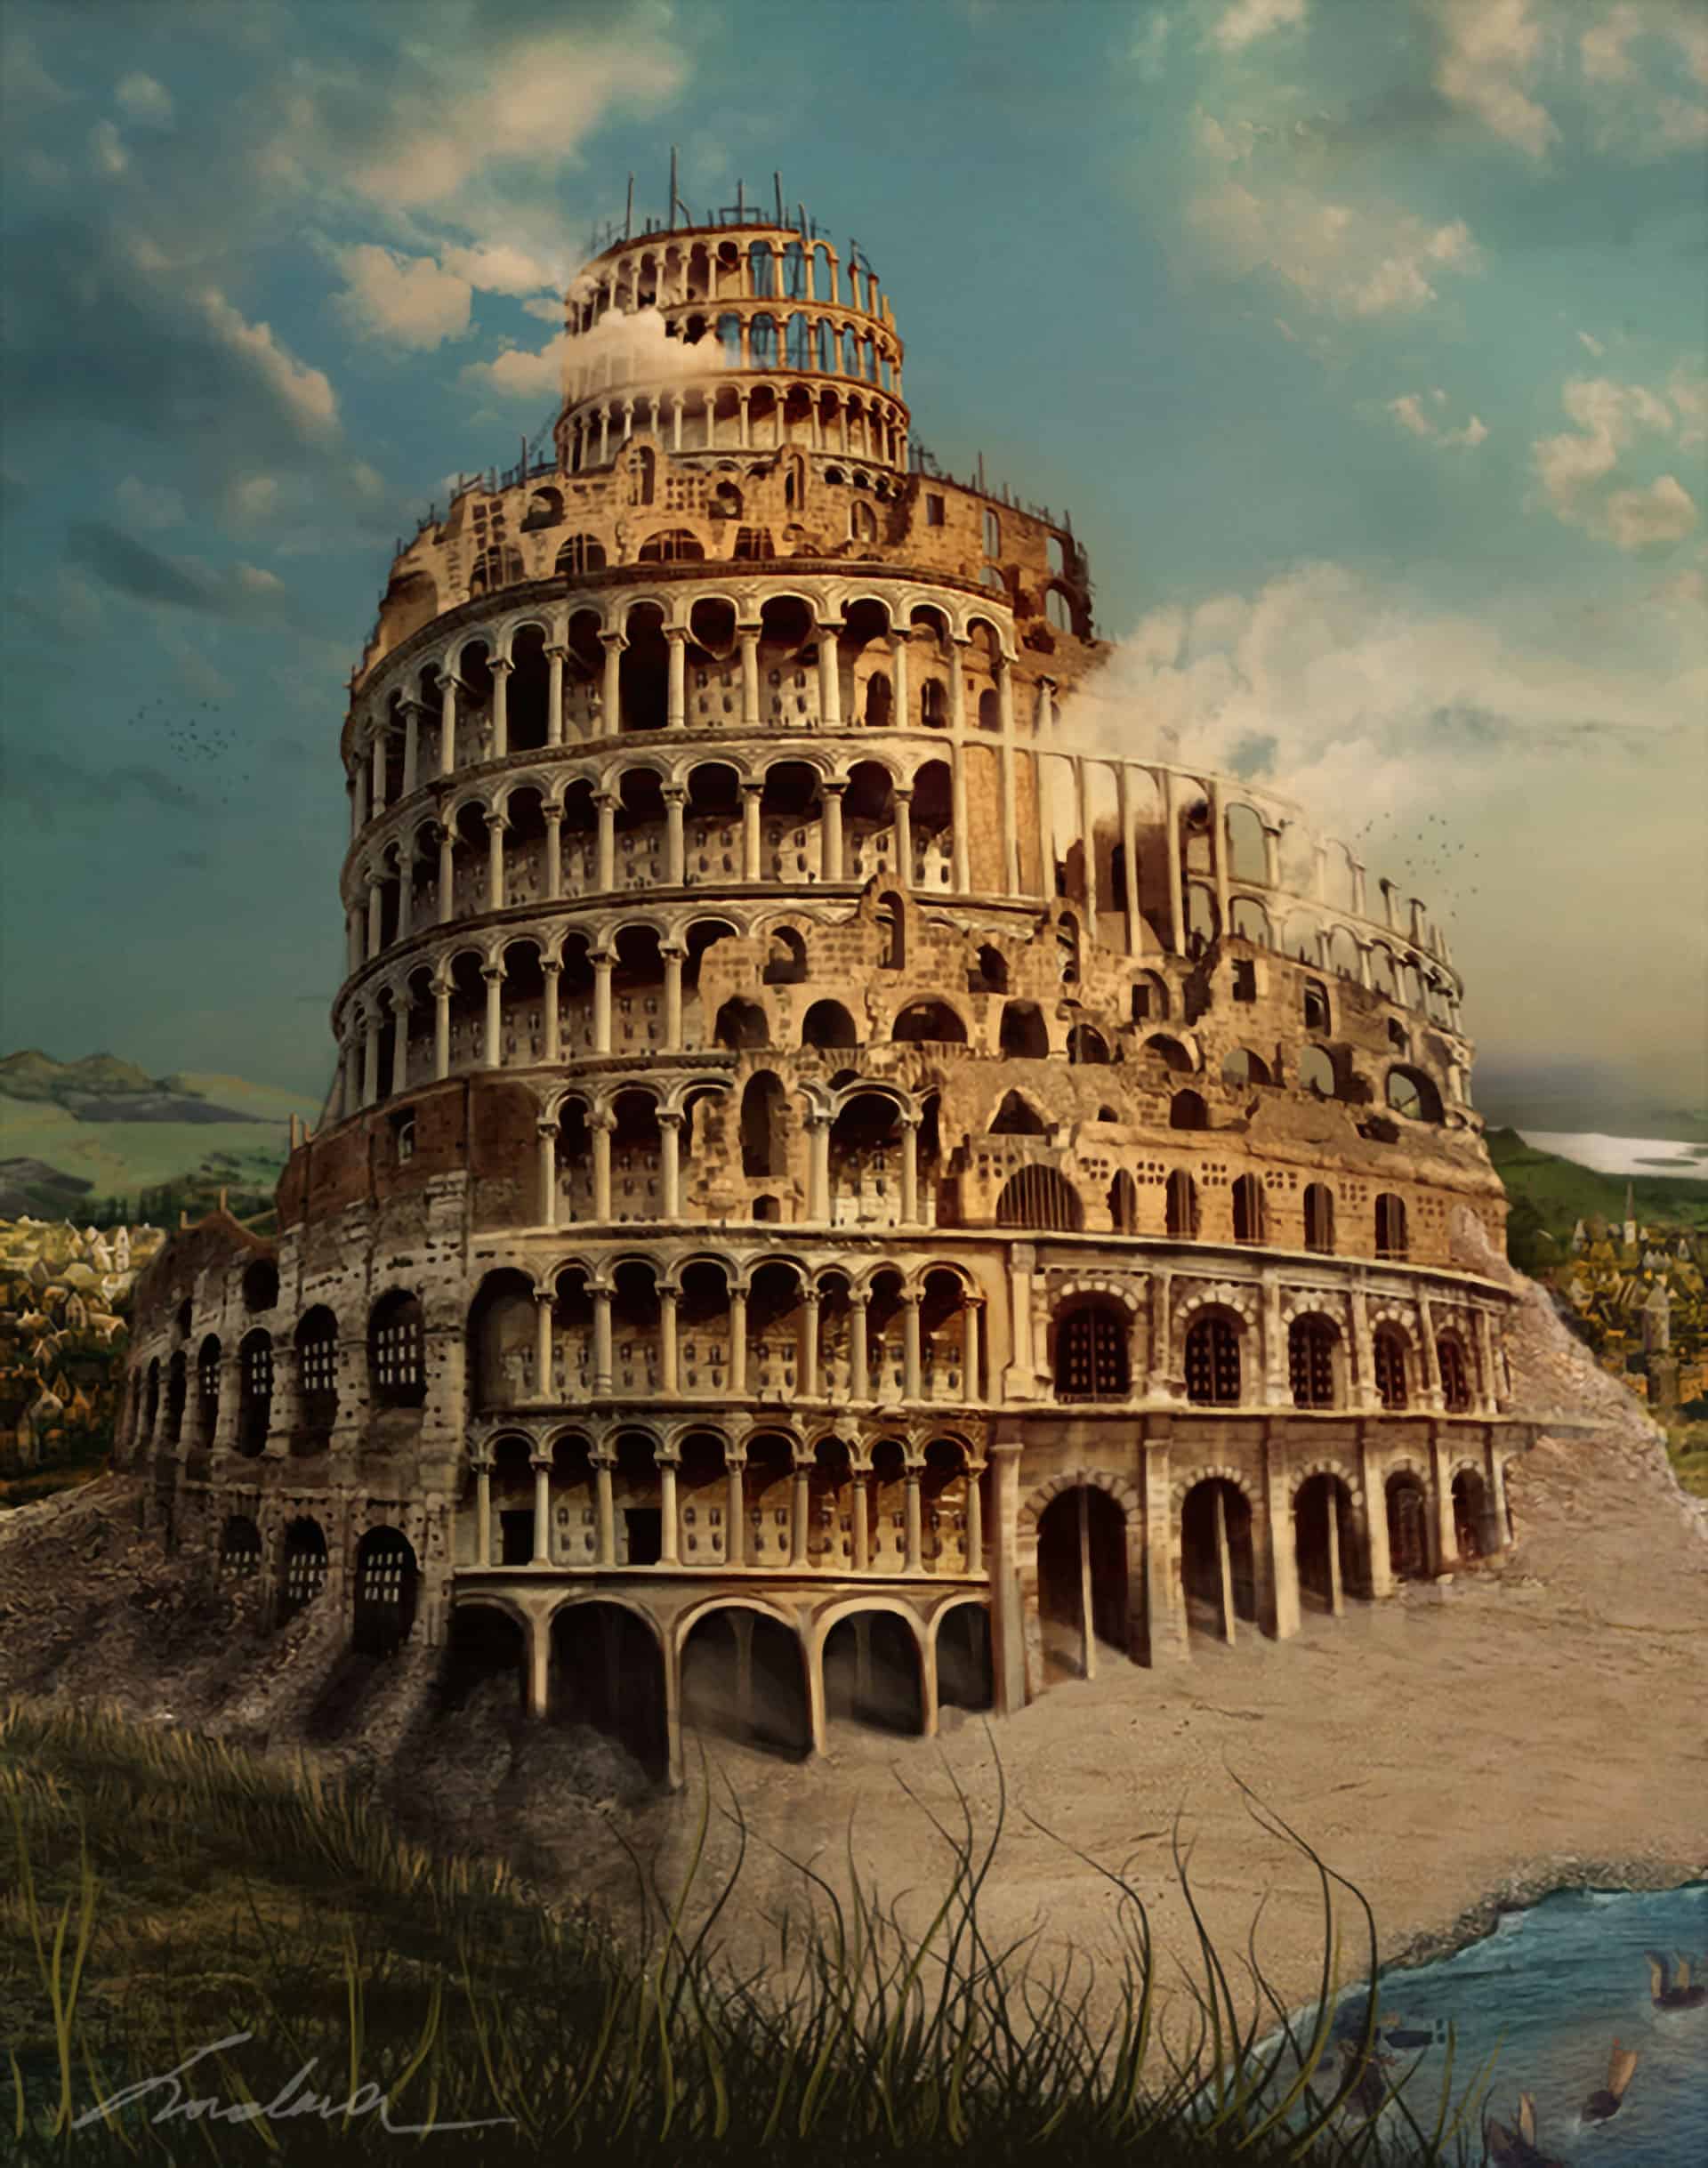 The Babel Tower Photo Manipulation